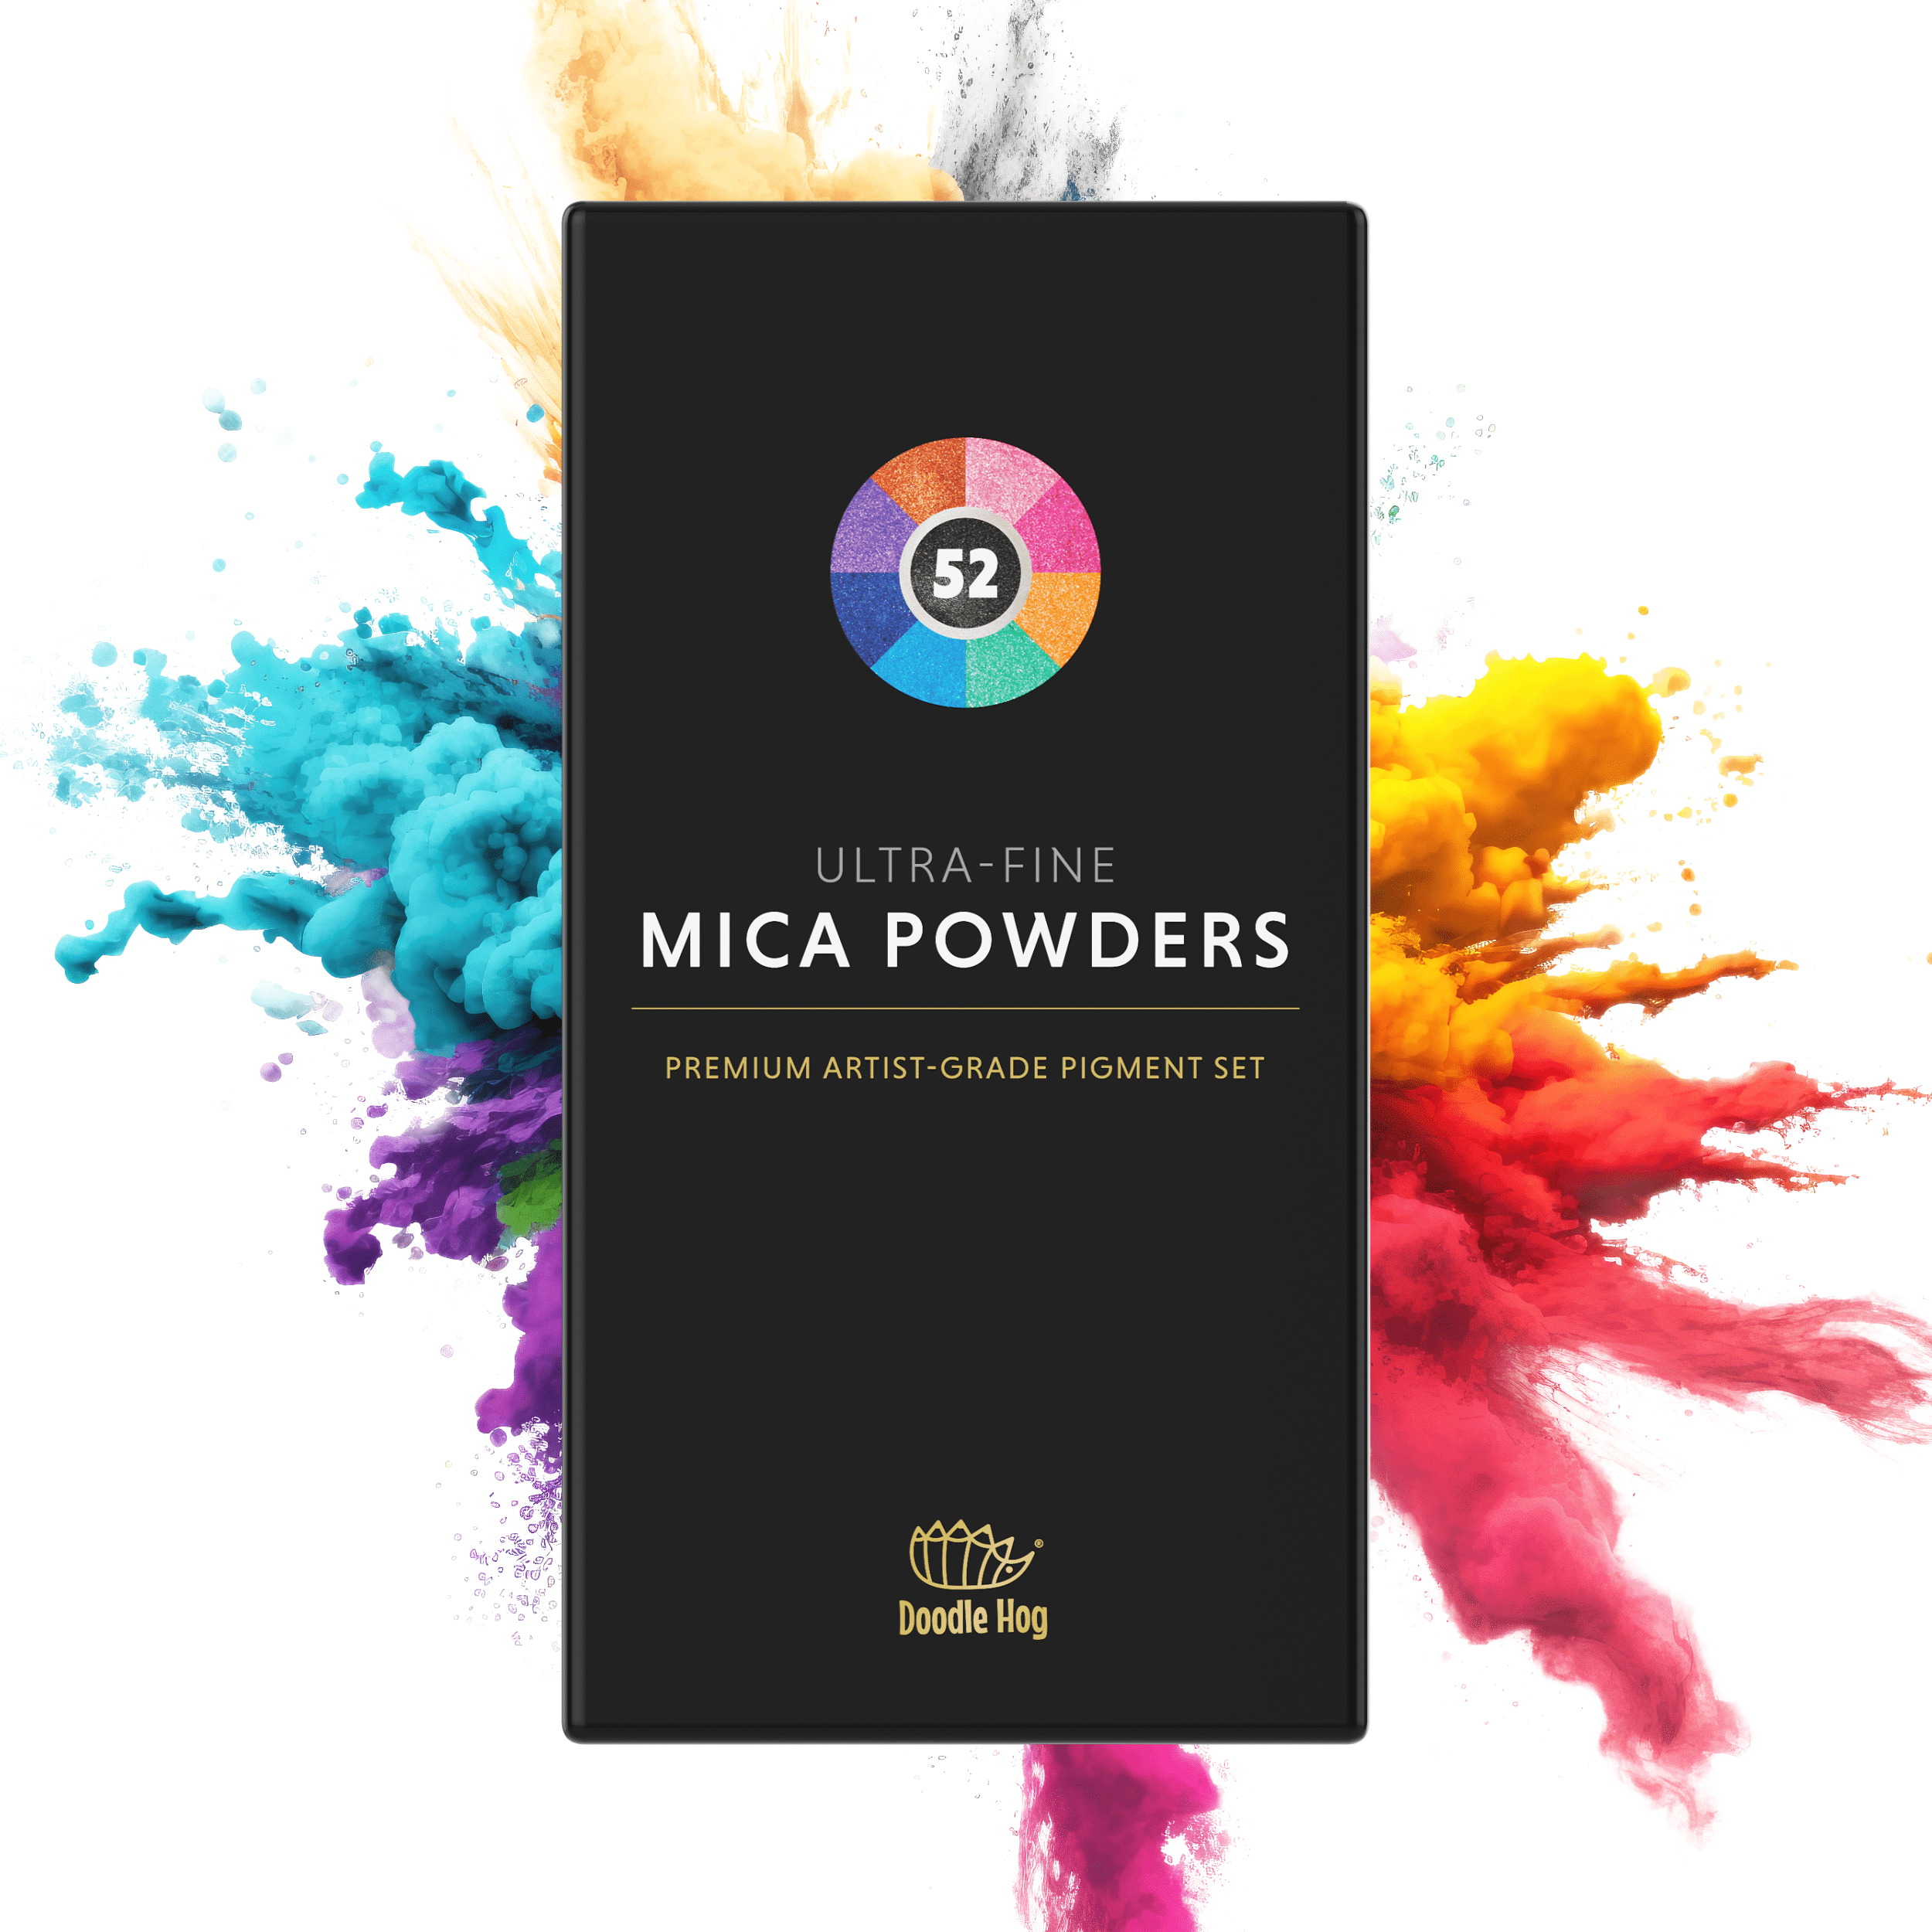 Chameleon Mica Powder for Epoxy Resin Color Shift Mica Powder Pigment for Soap Making, Candle Making,Slime (1g per Jar / 12 Colors)